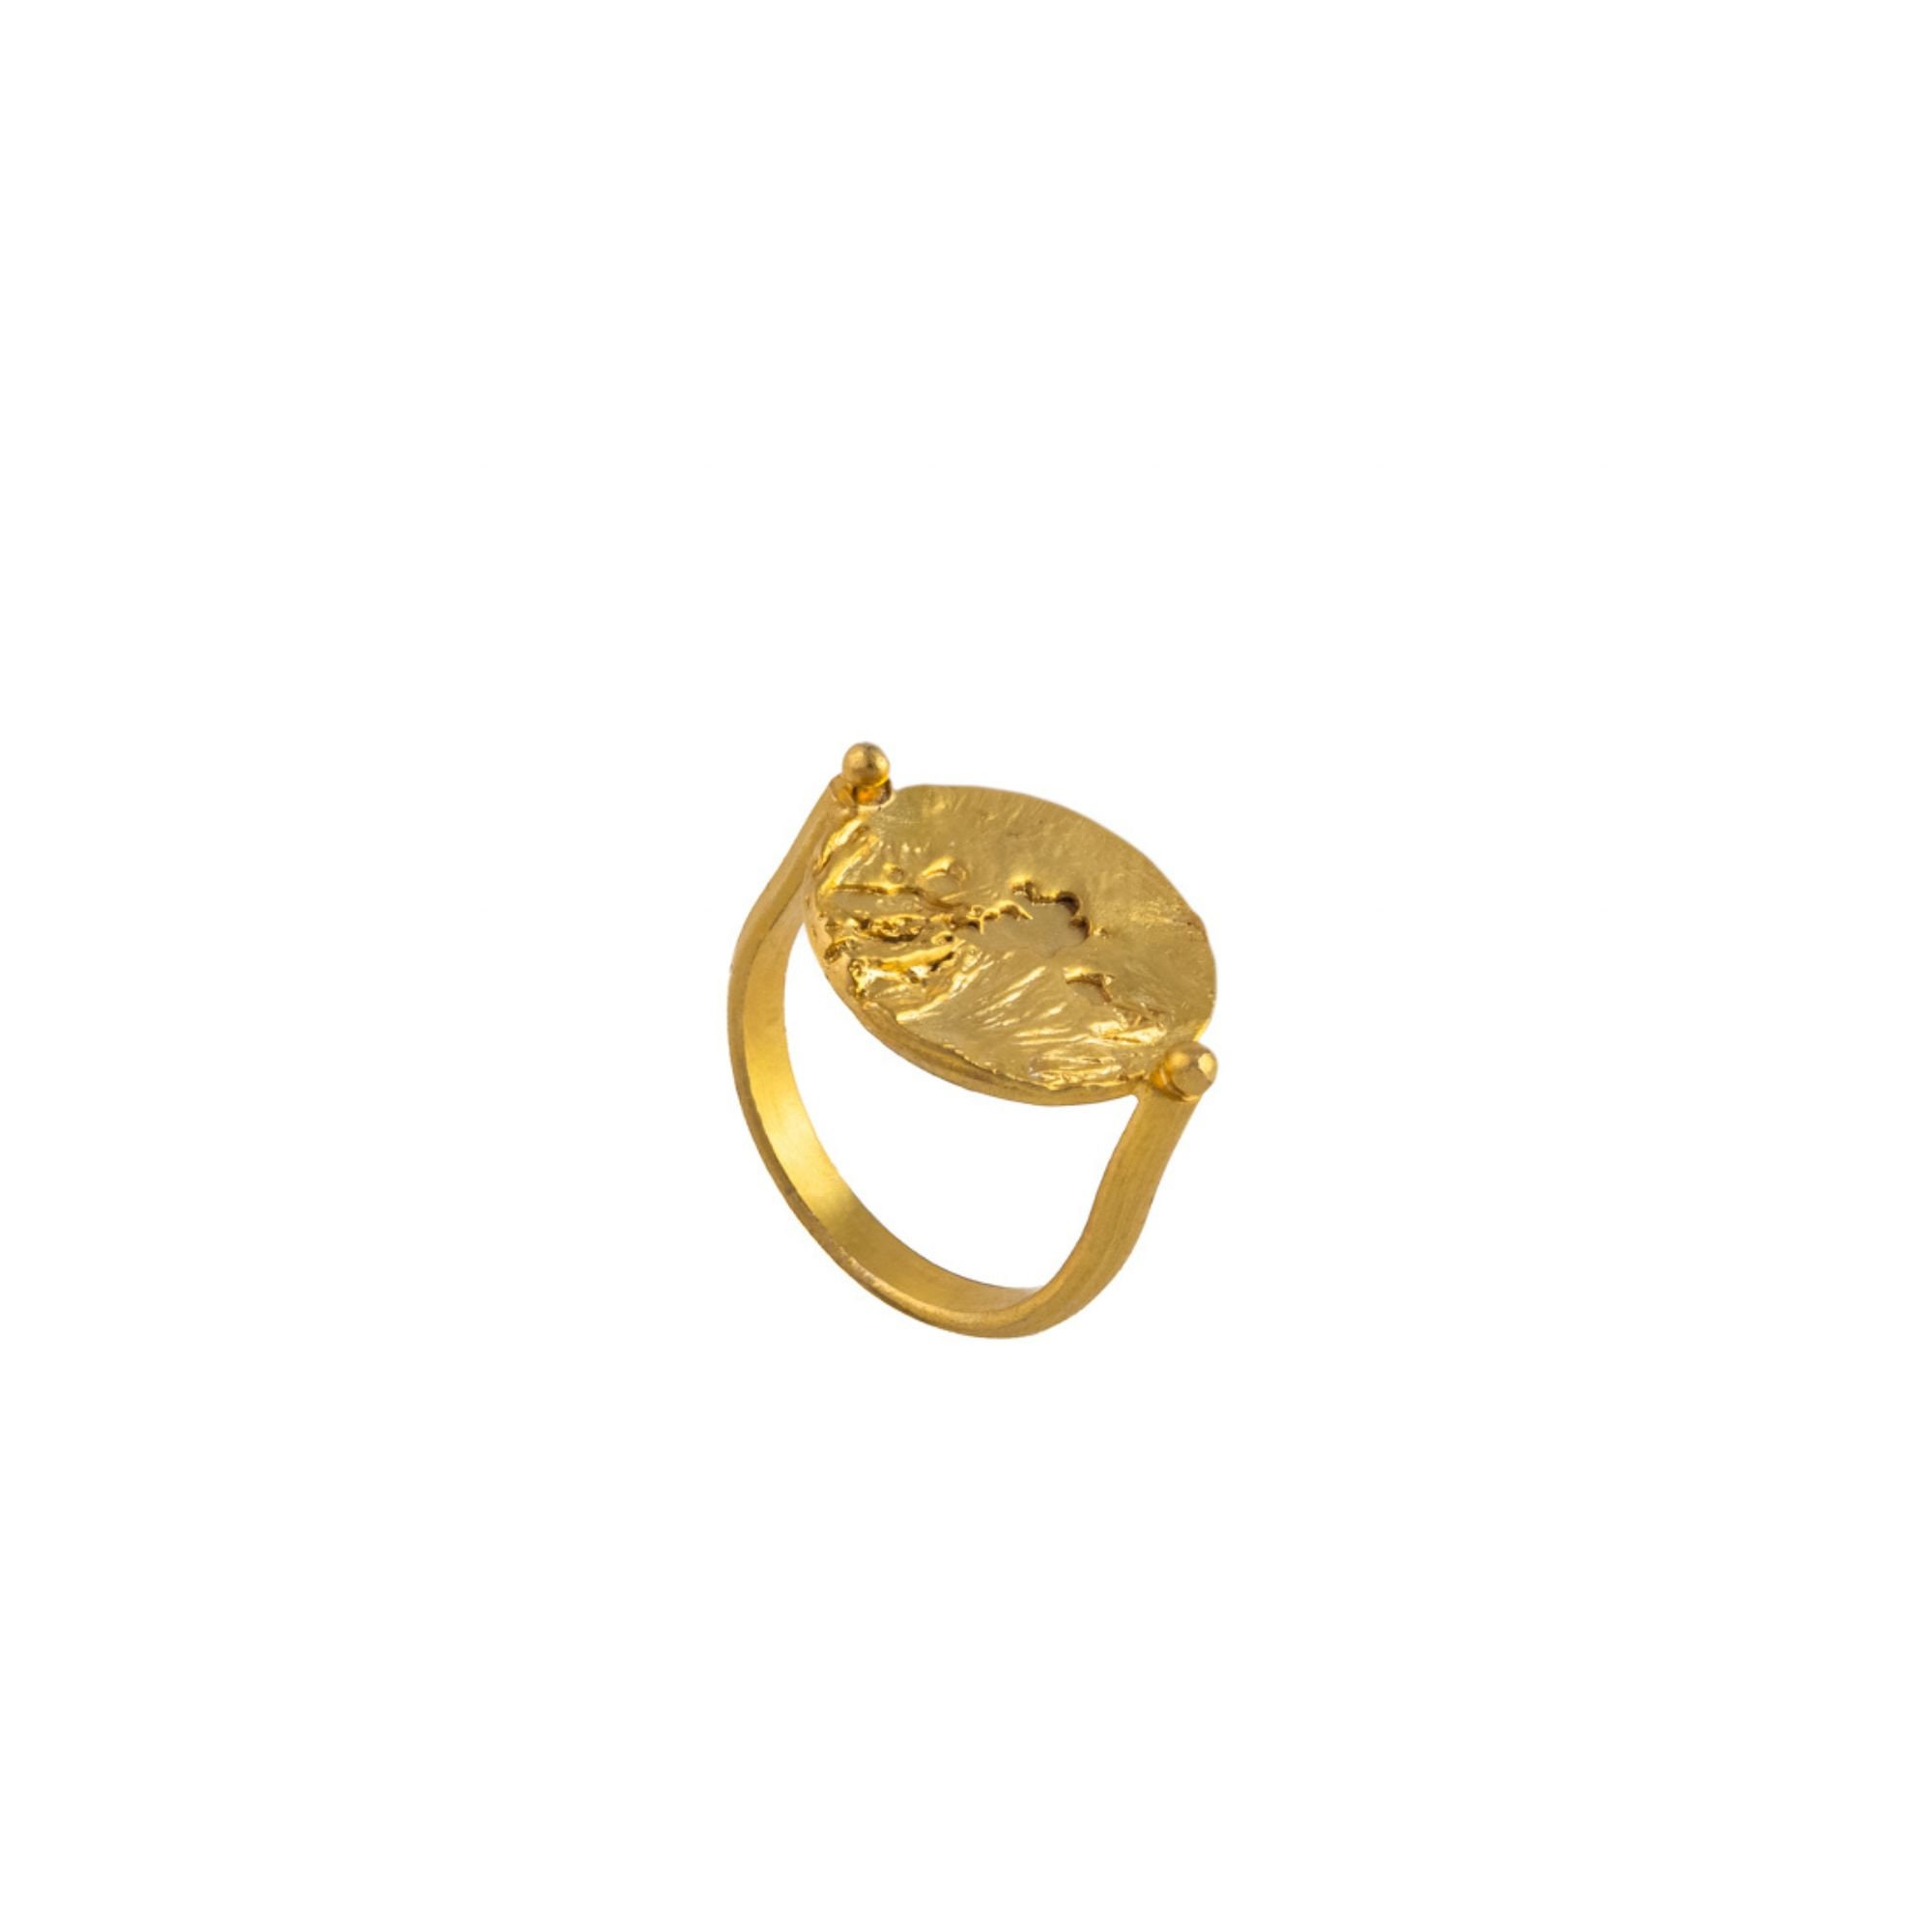 Unique Textured Gold Plated Moon Ring Caldera Statement Ring